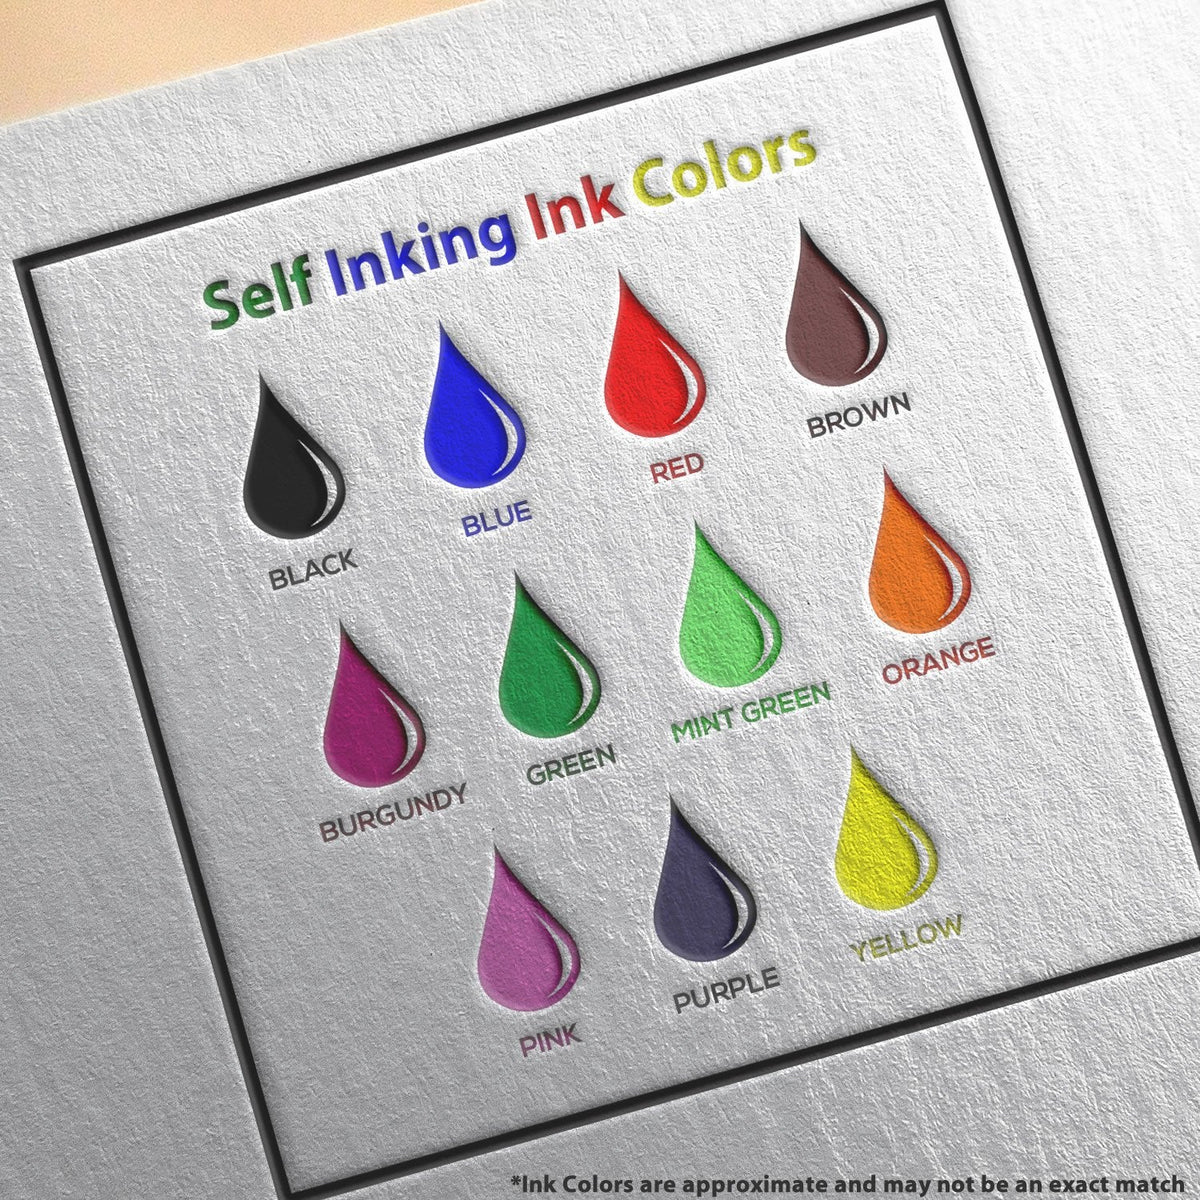 Self Inking Notice Of Action Stamp Ink Color Options